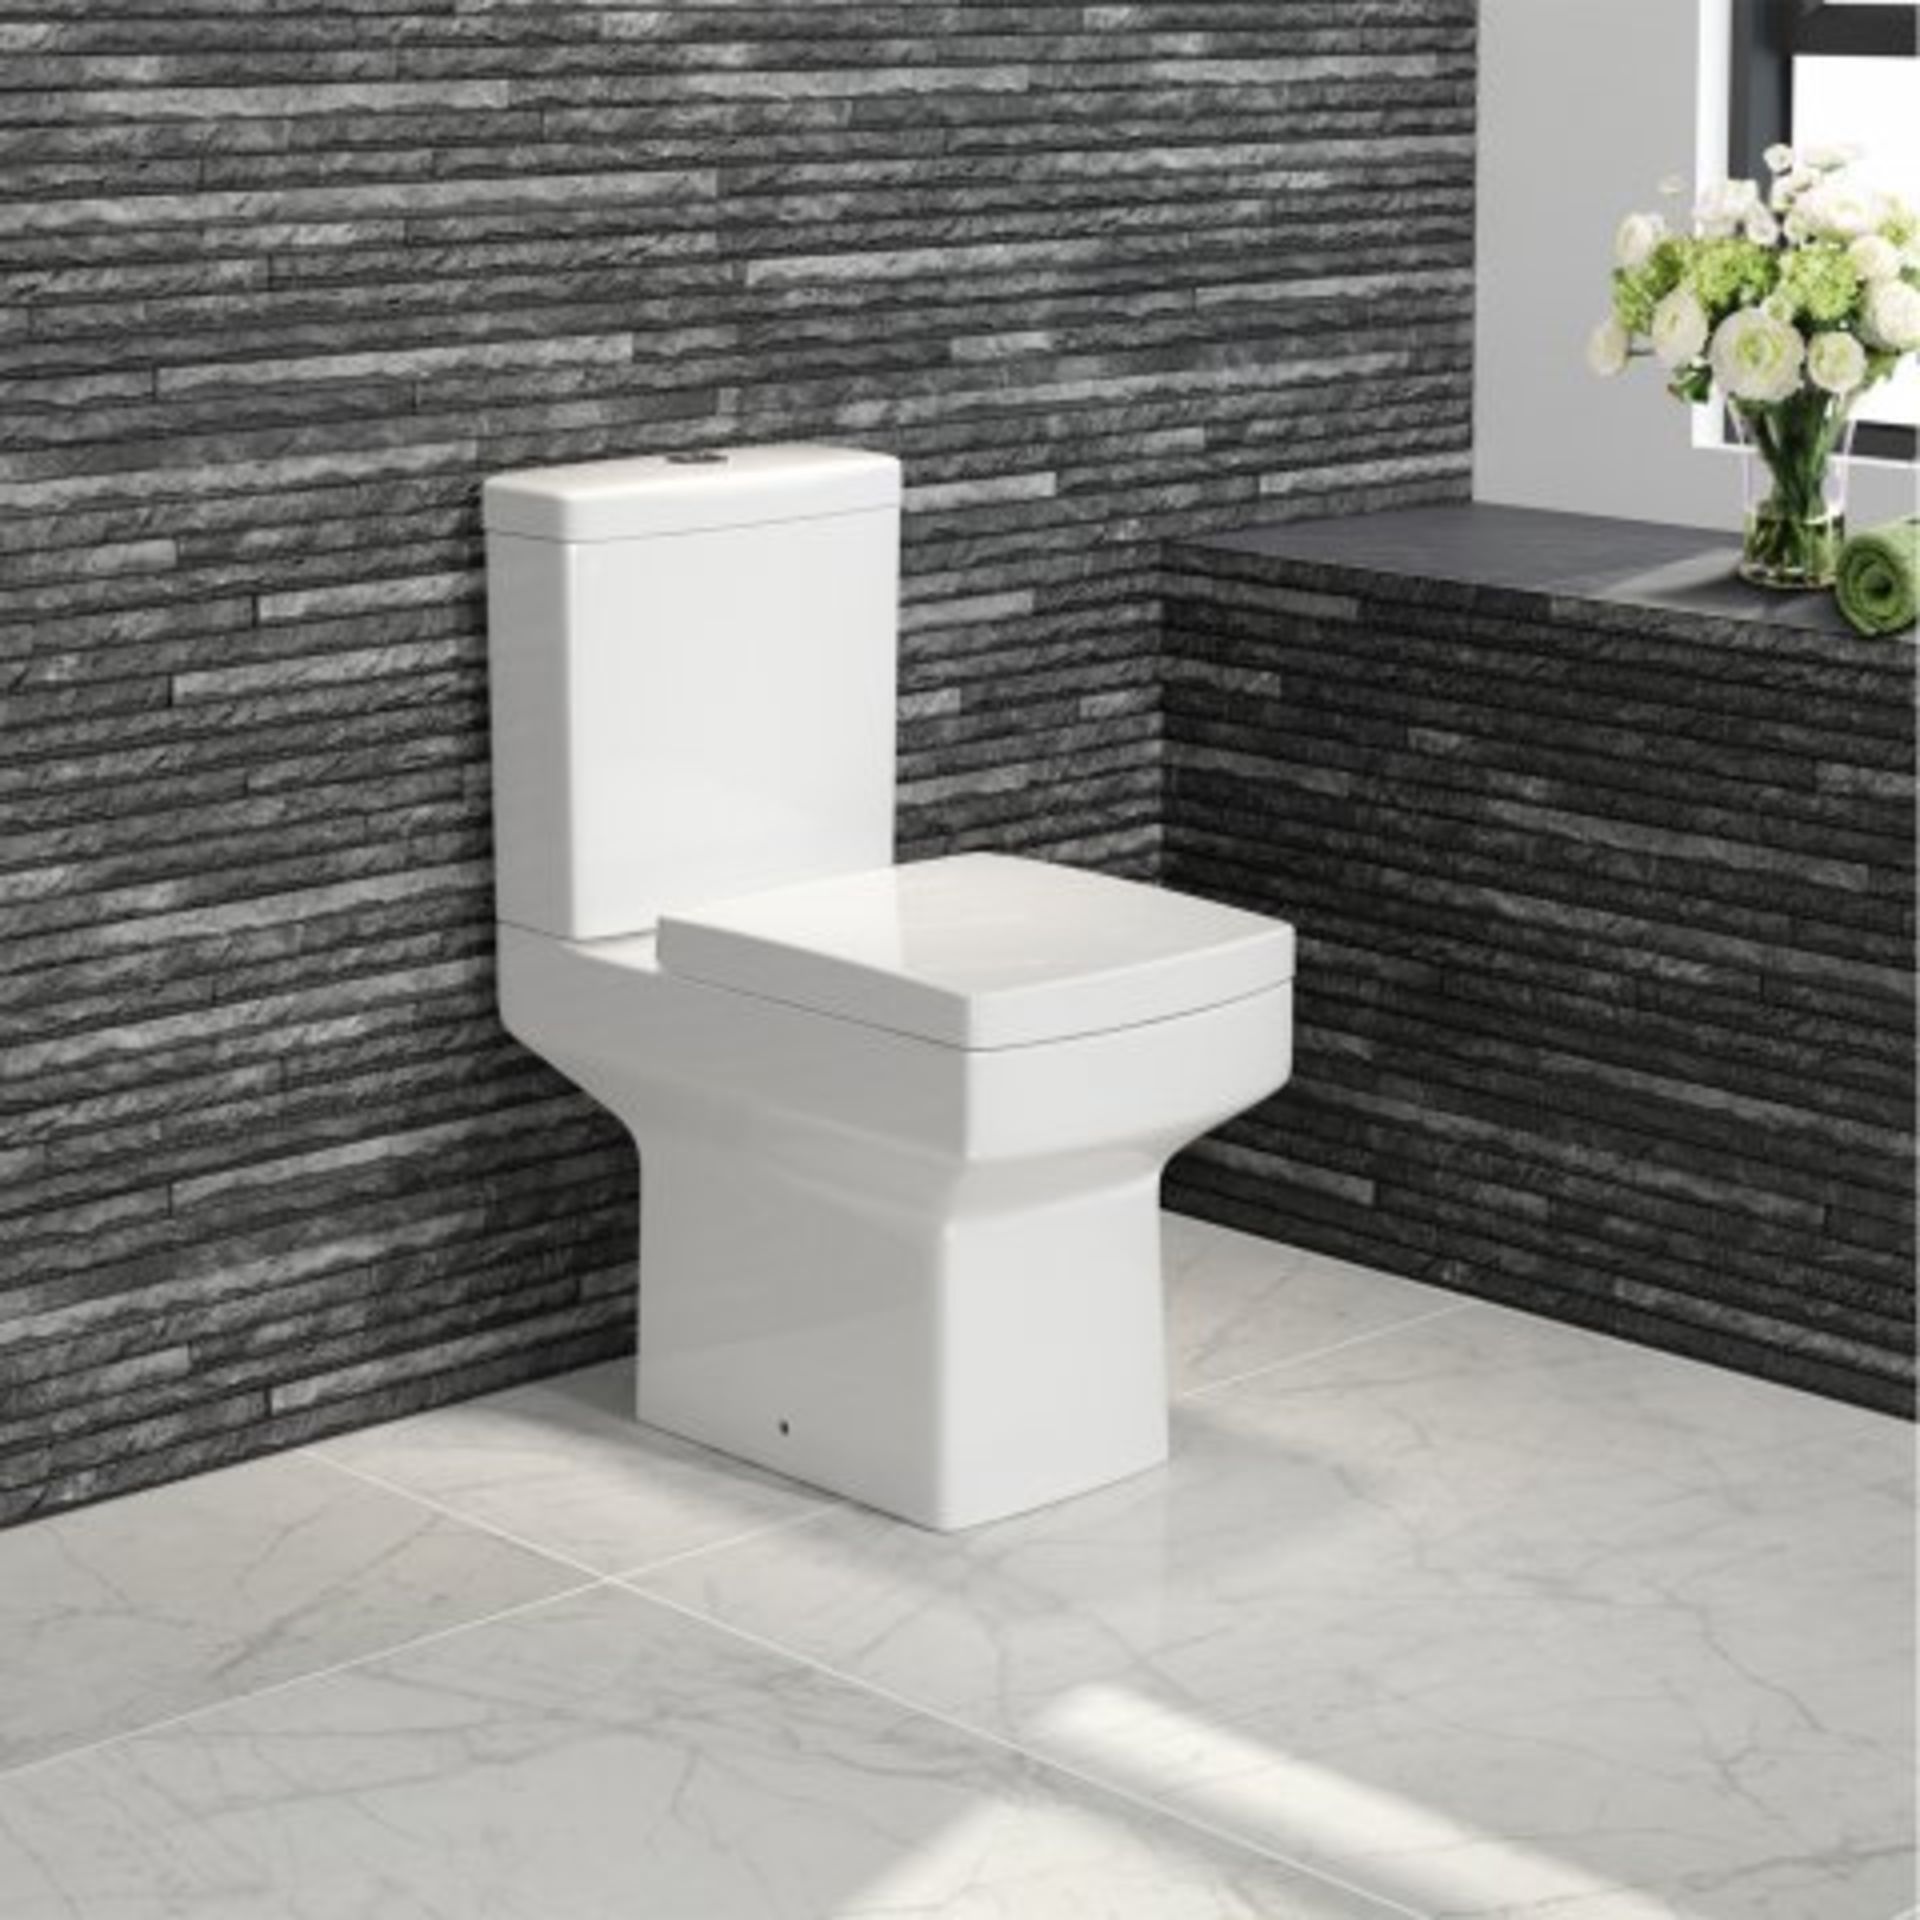 NEW & BOXED Belfort Close Coupled Toilet & Cistern inc Soft Close Seat. RRP £499.99.CC645.Lon... - Image 2 of 3